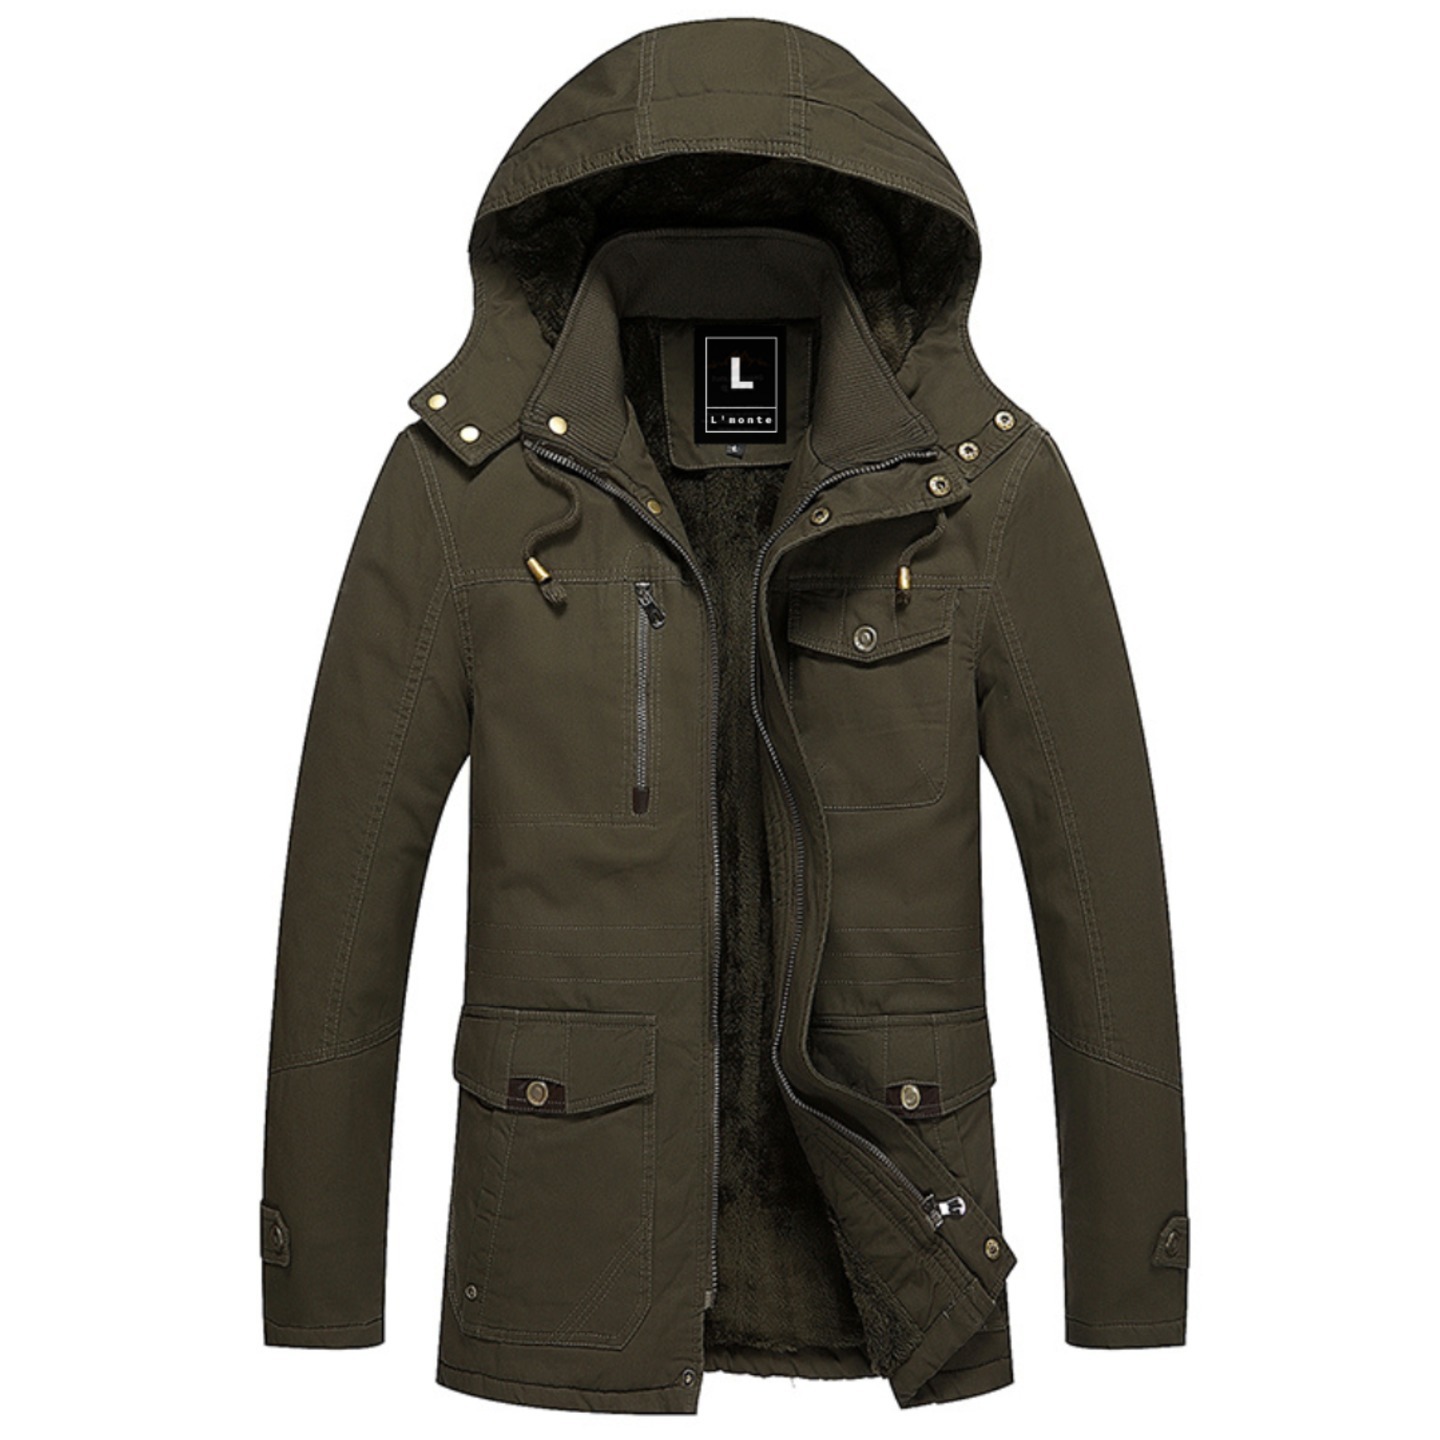 L'MONTE Casual Cotton Fur Winter Hooded Jacket for Men